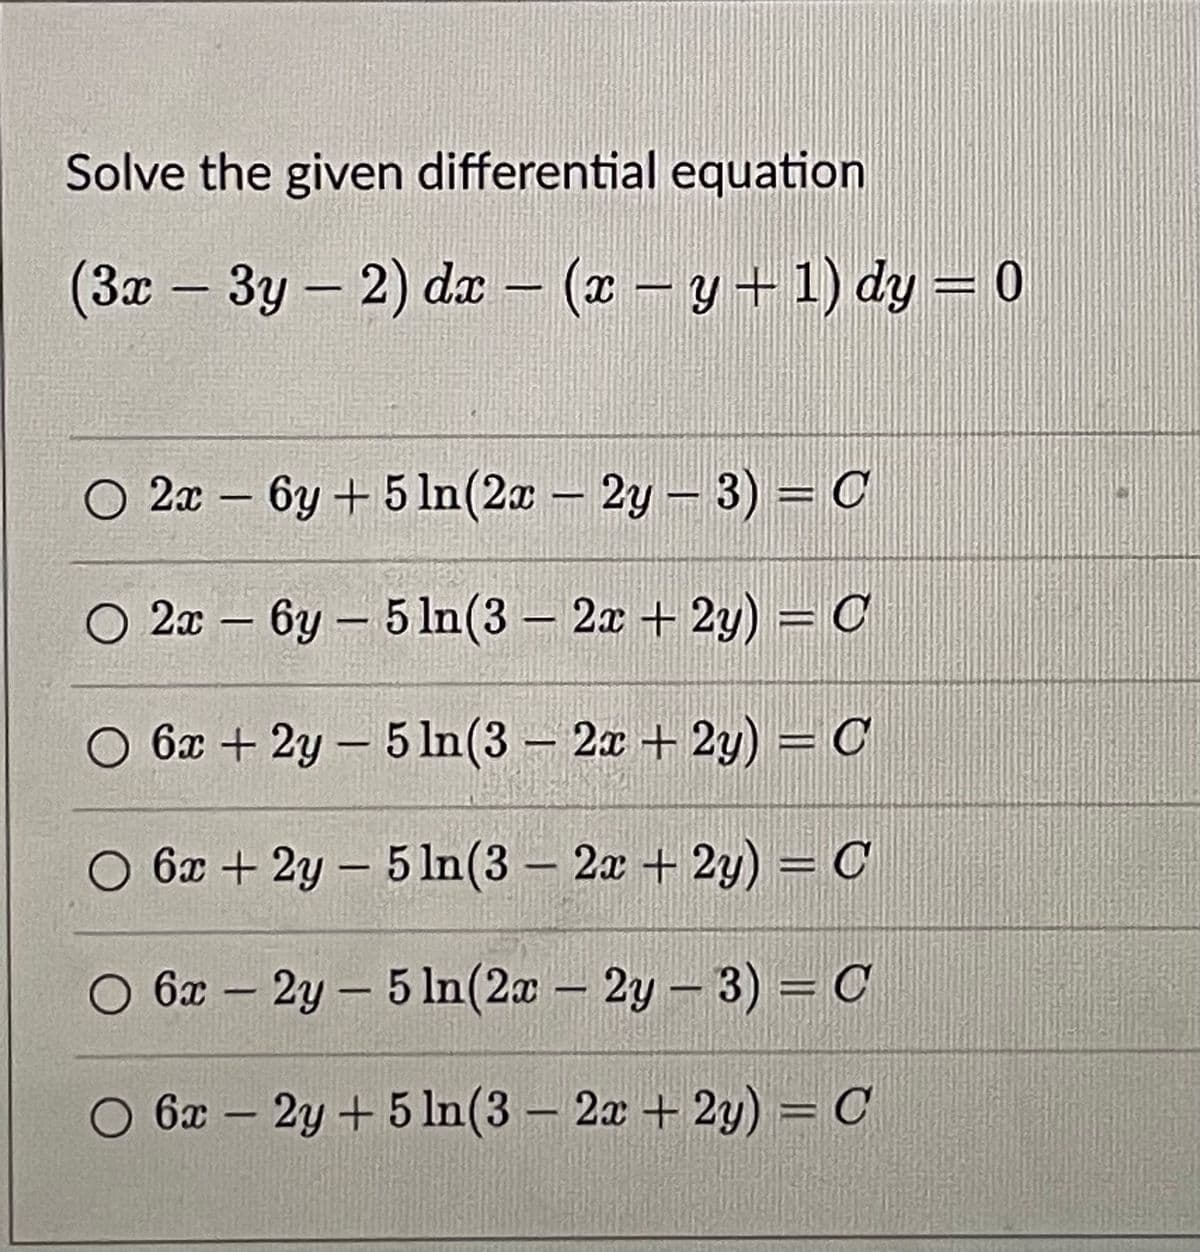 Solve the given differential equation
(3x – 3y – 2) da – (x – y + 1) dy = 0
O 2x – 6y +5 In(2a – 2y- 3) = C
O 2x – 6y – 5 In(3 – 2x + 2y) = C
-
O 6x+2y- 5 In(3 – 2x + 2y) = C
O 6x + 2y – 5 In(3 – 2x + 2y) = C
O 6x – 2y - 5 ln(2a – 2y – 3) = C
O 6x – 2y +5 In(3 – 2x + 2y) = C
